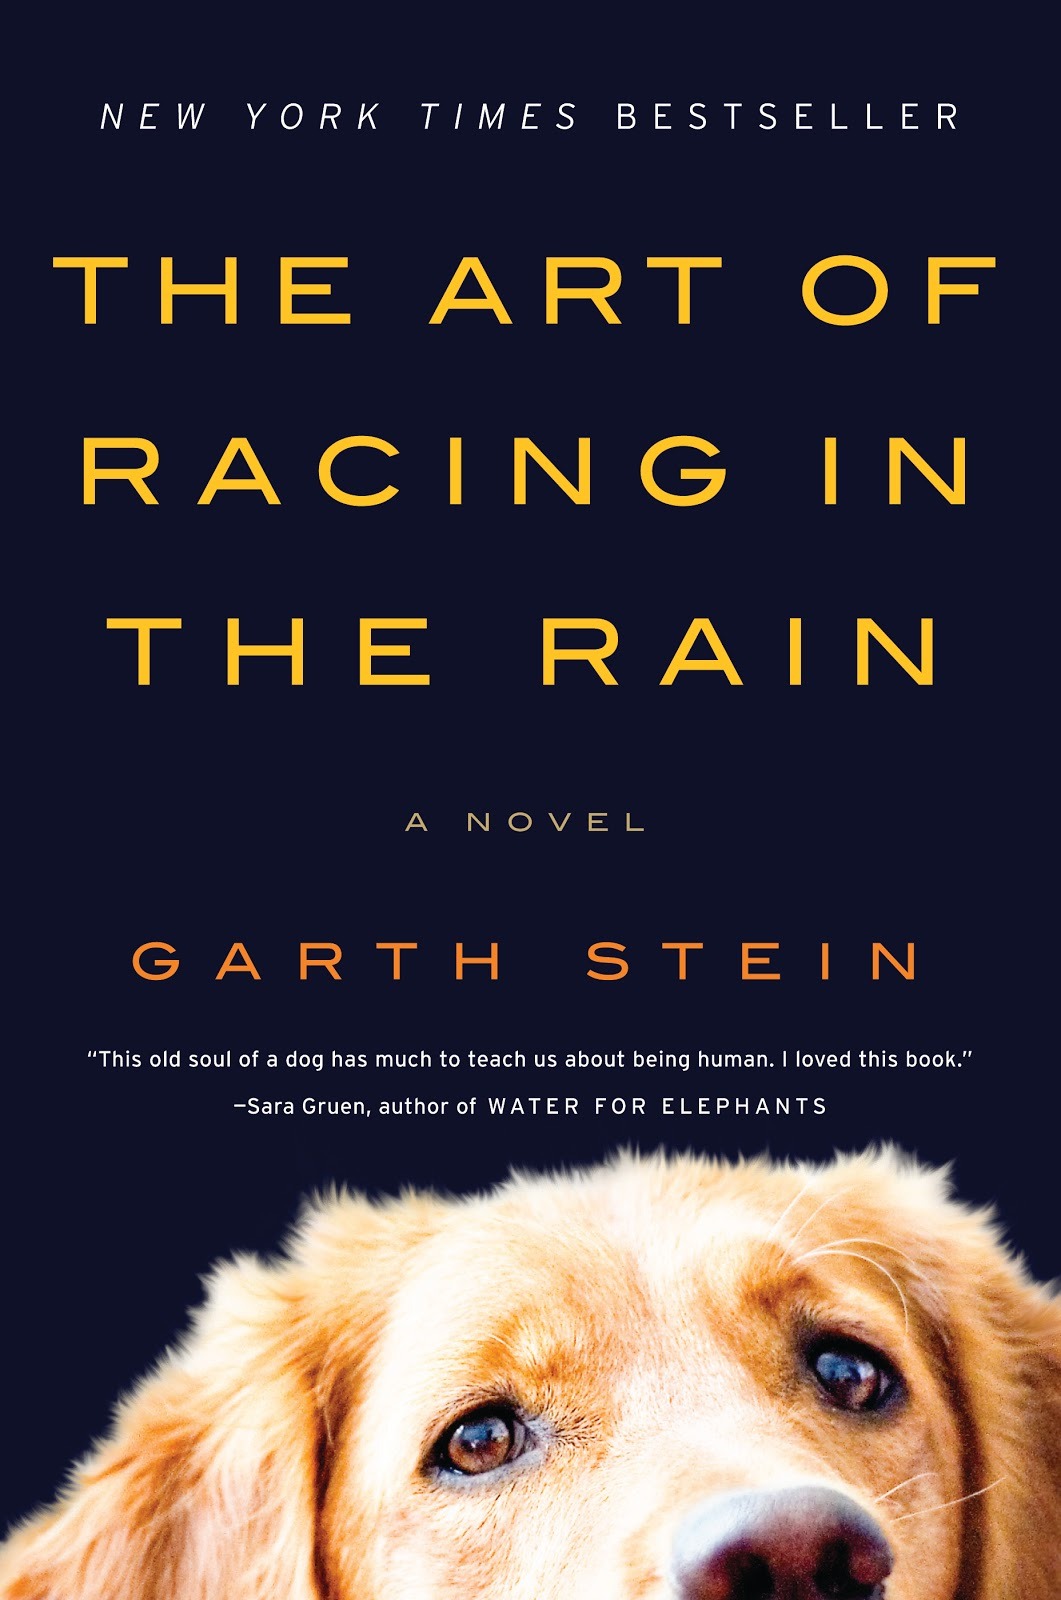 BOOK MANIA! — “The Art of Racing in the Rain” by Garth